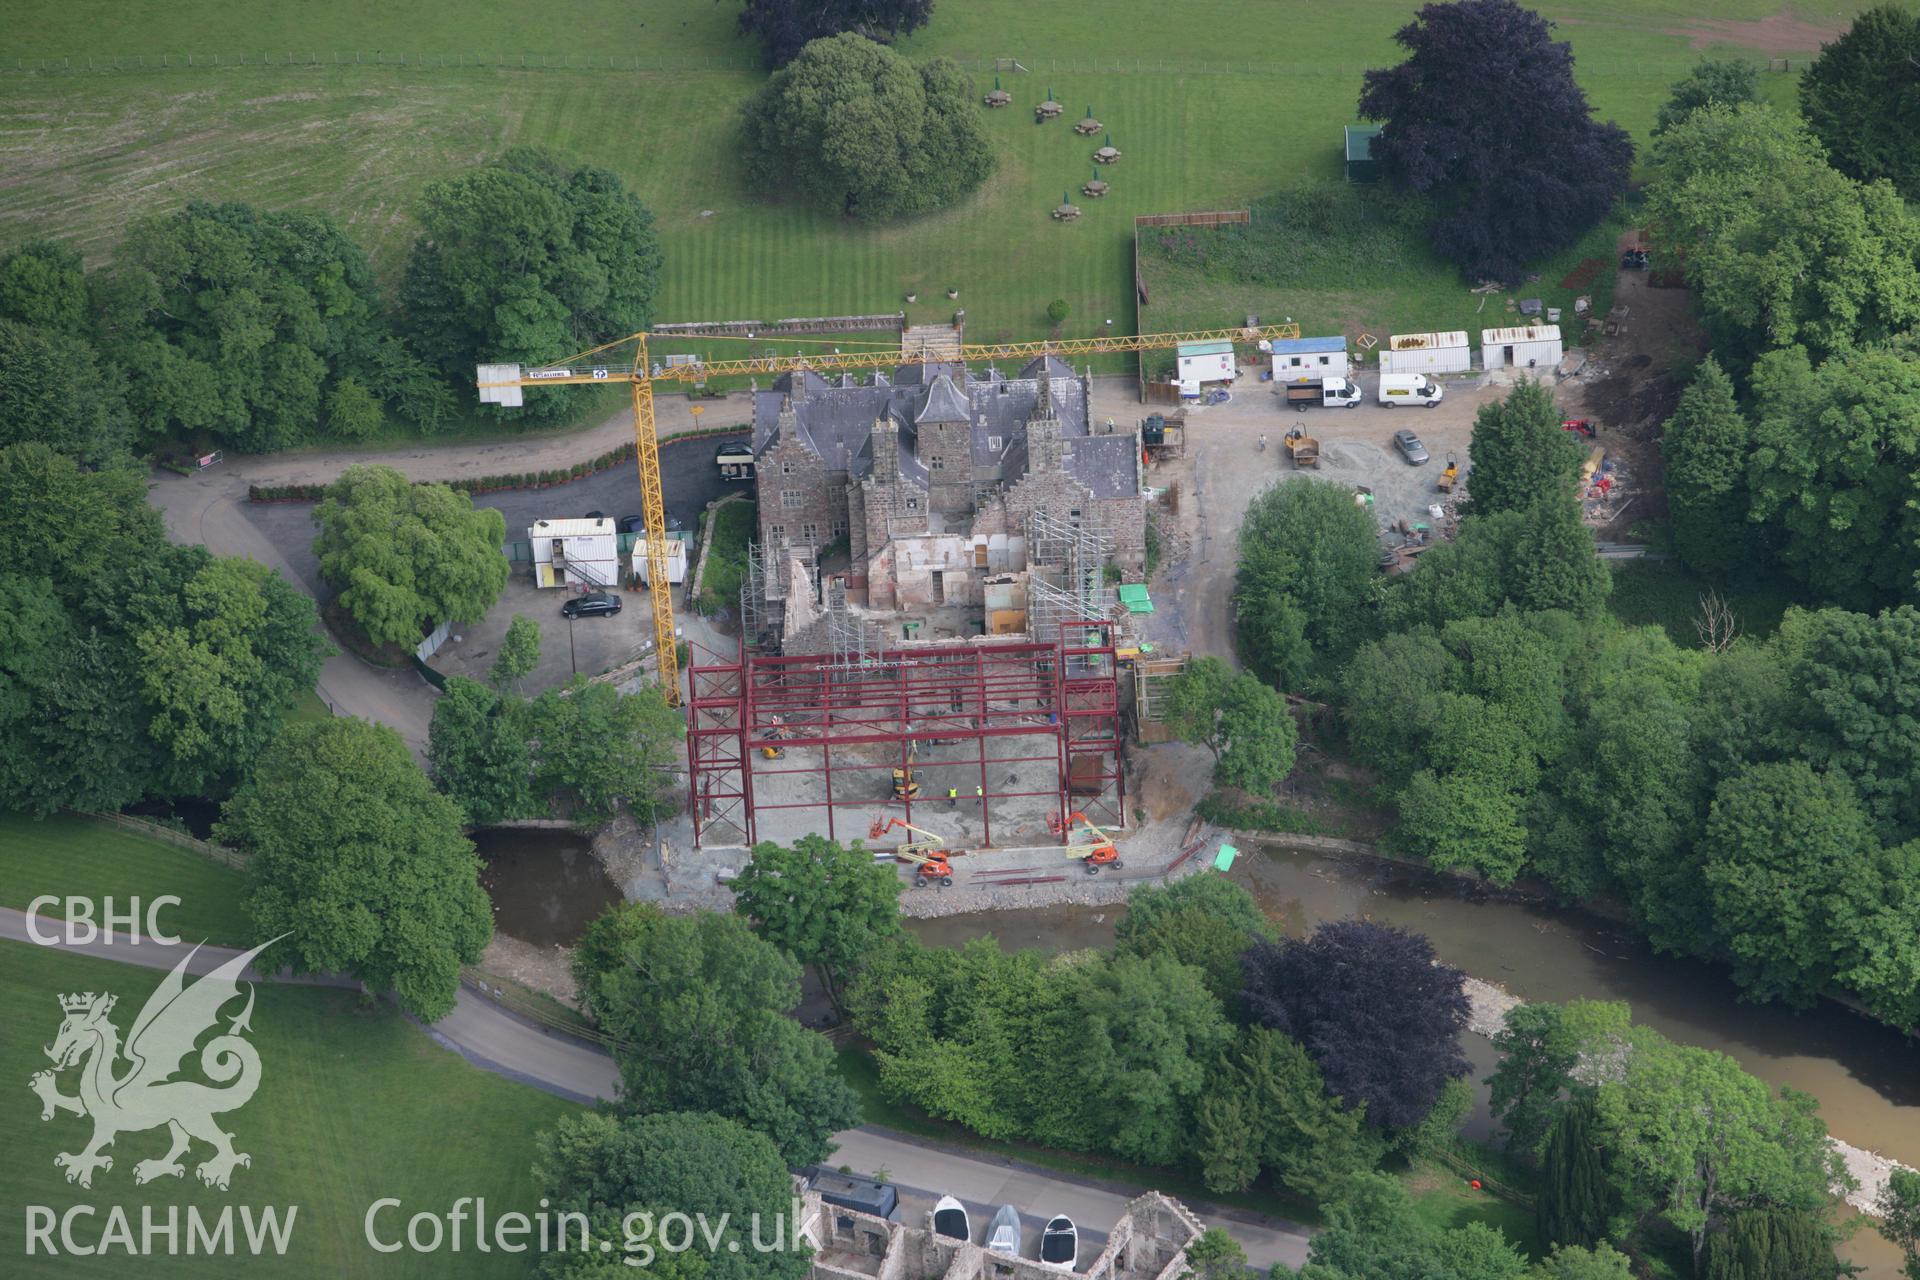 RCAHMW colour oblique photograph of Plas Coch, undergoing redevelopment in 2008. Taken by Toby Driver on 13/06/2008.